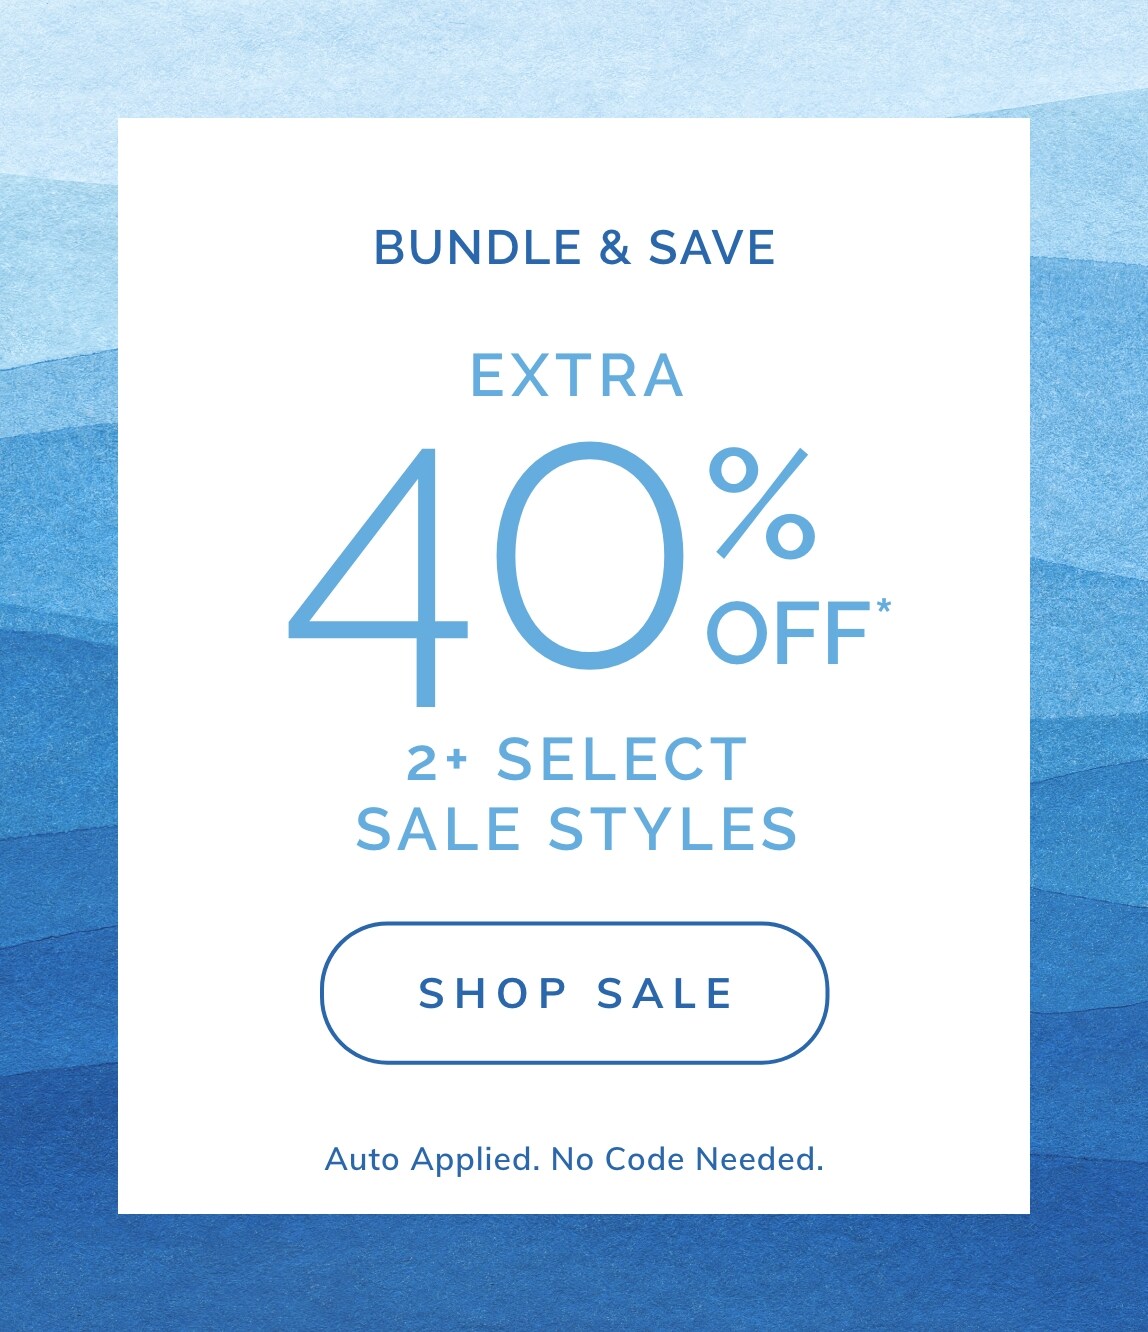 EXTRA 40% Off 2+ SELECT SALE STYLES